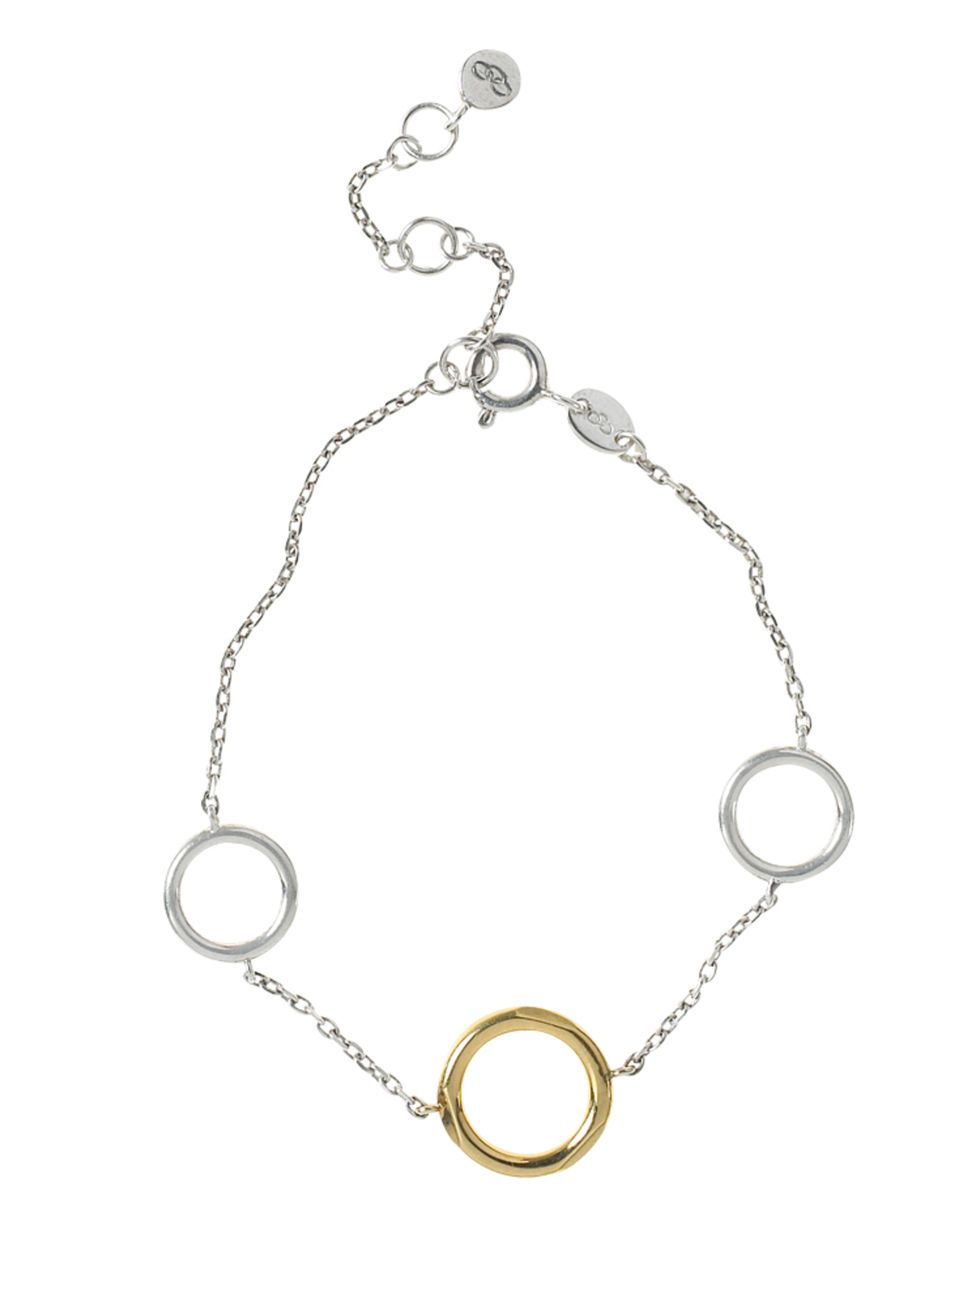 <p>Gold and silver bracelet, &pound;275, Links Of London</p>

<p>&nbsp;</p>